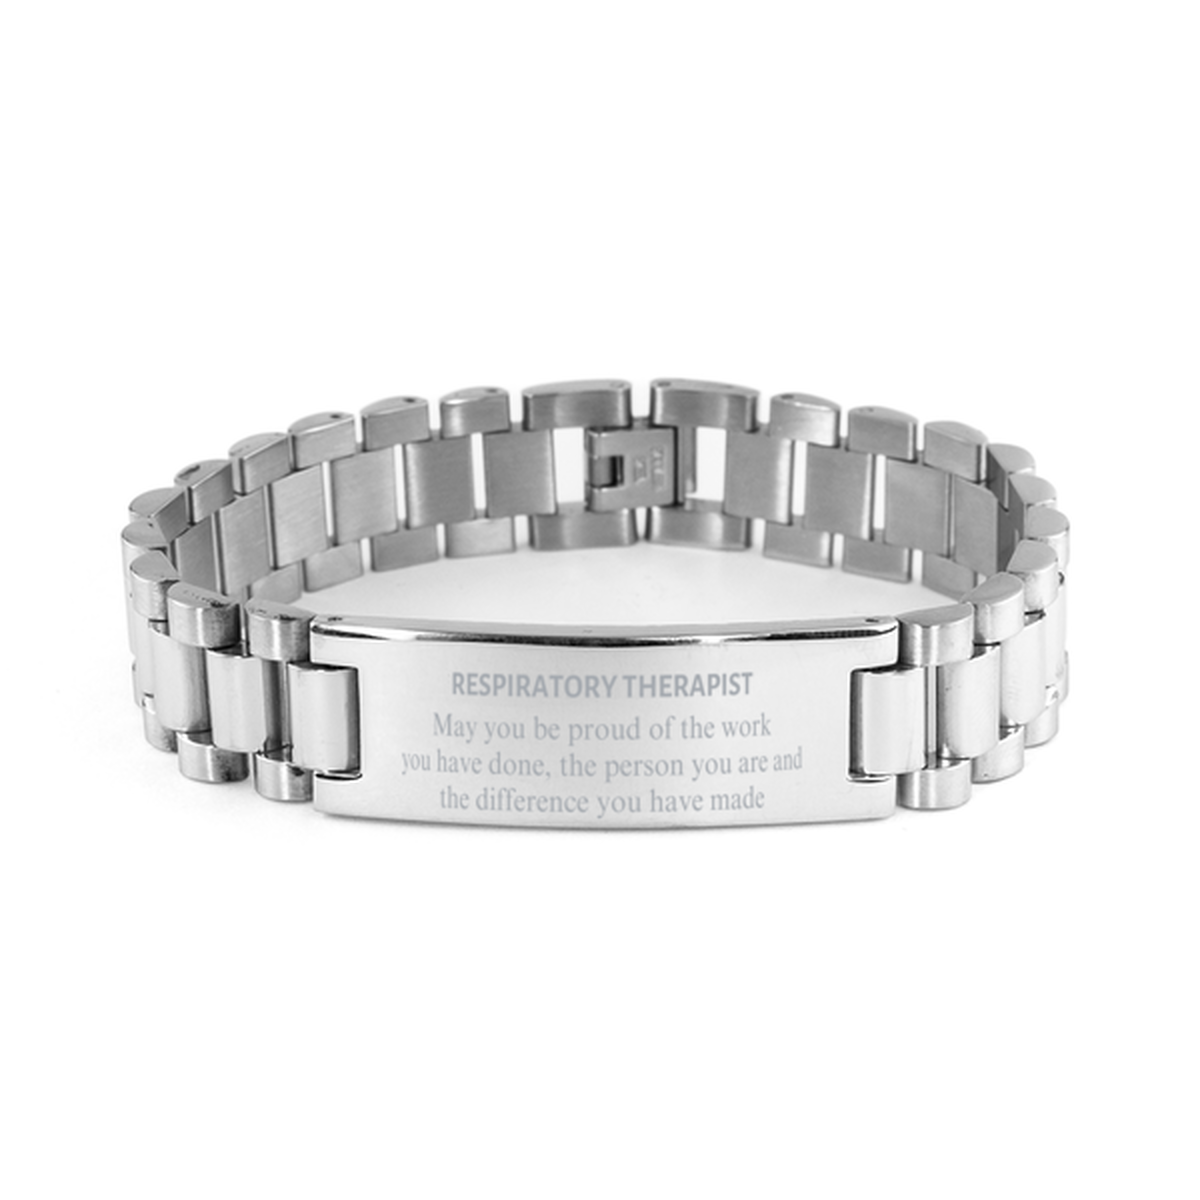 Respiratory Therapist May you be proud of the work you have done, Retirement Respiratory Therapist Ladder Stainless Steel Bracelet for Colleague Appreciation Gifts Amazing for Respiratory Therapist